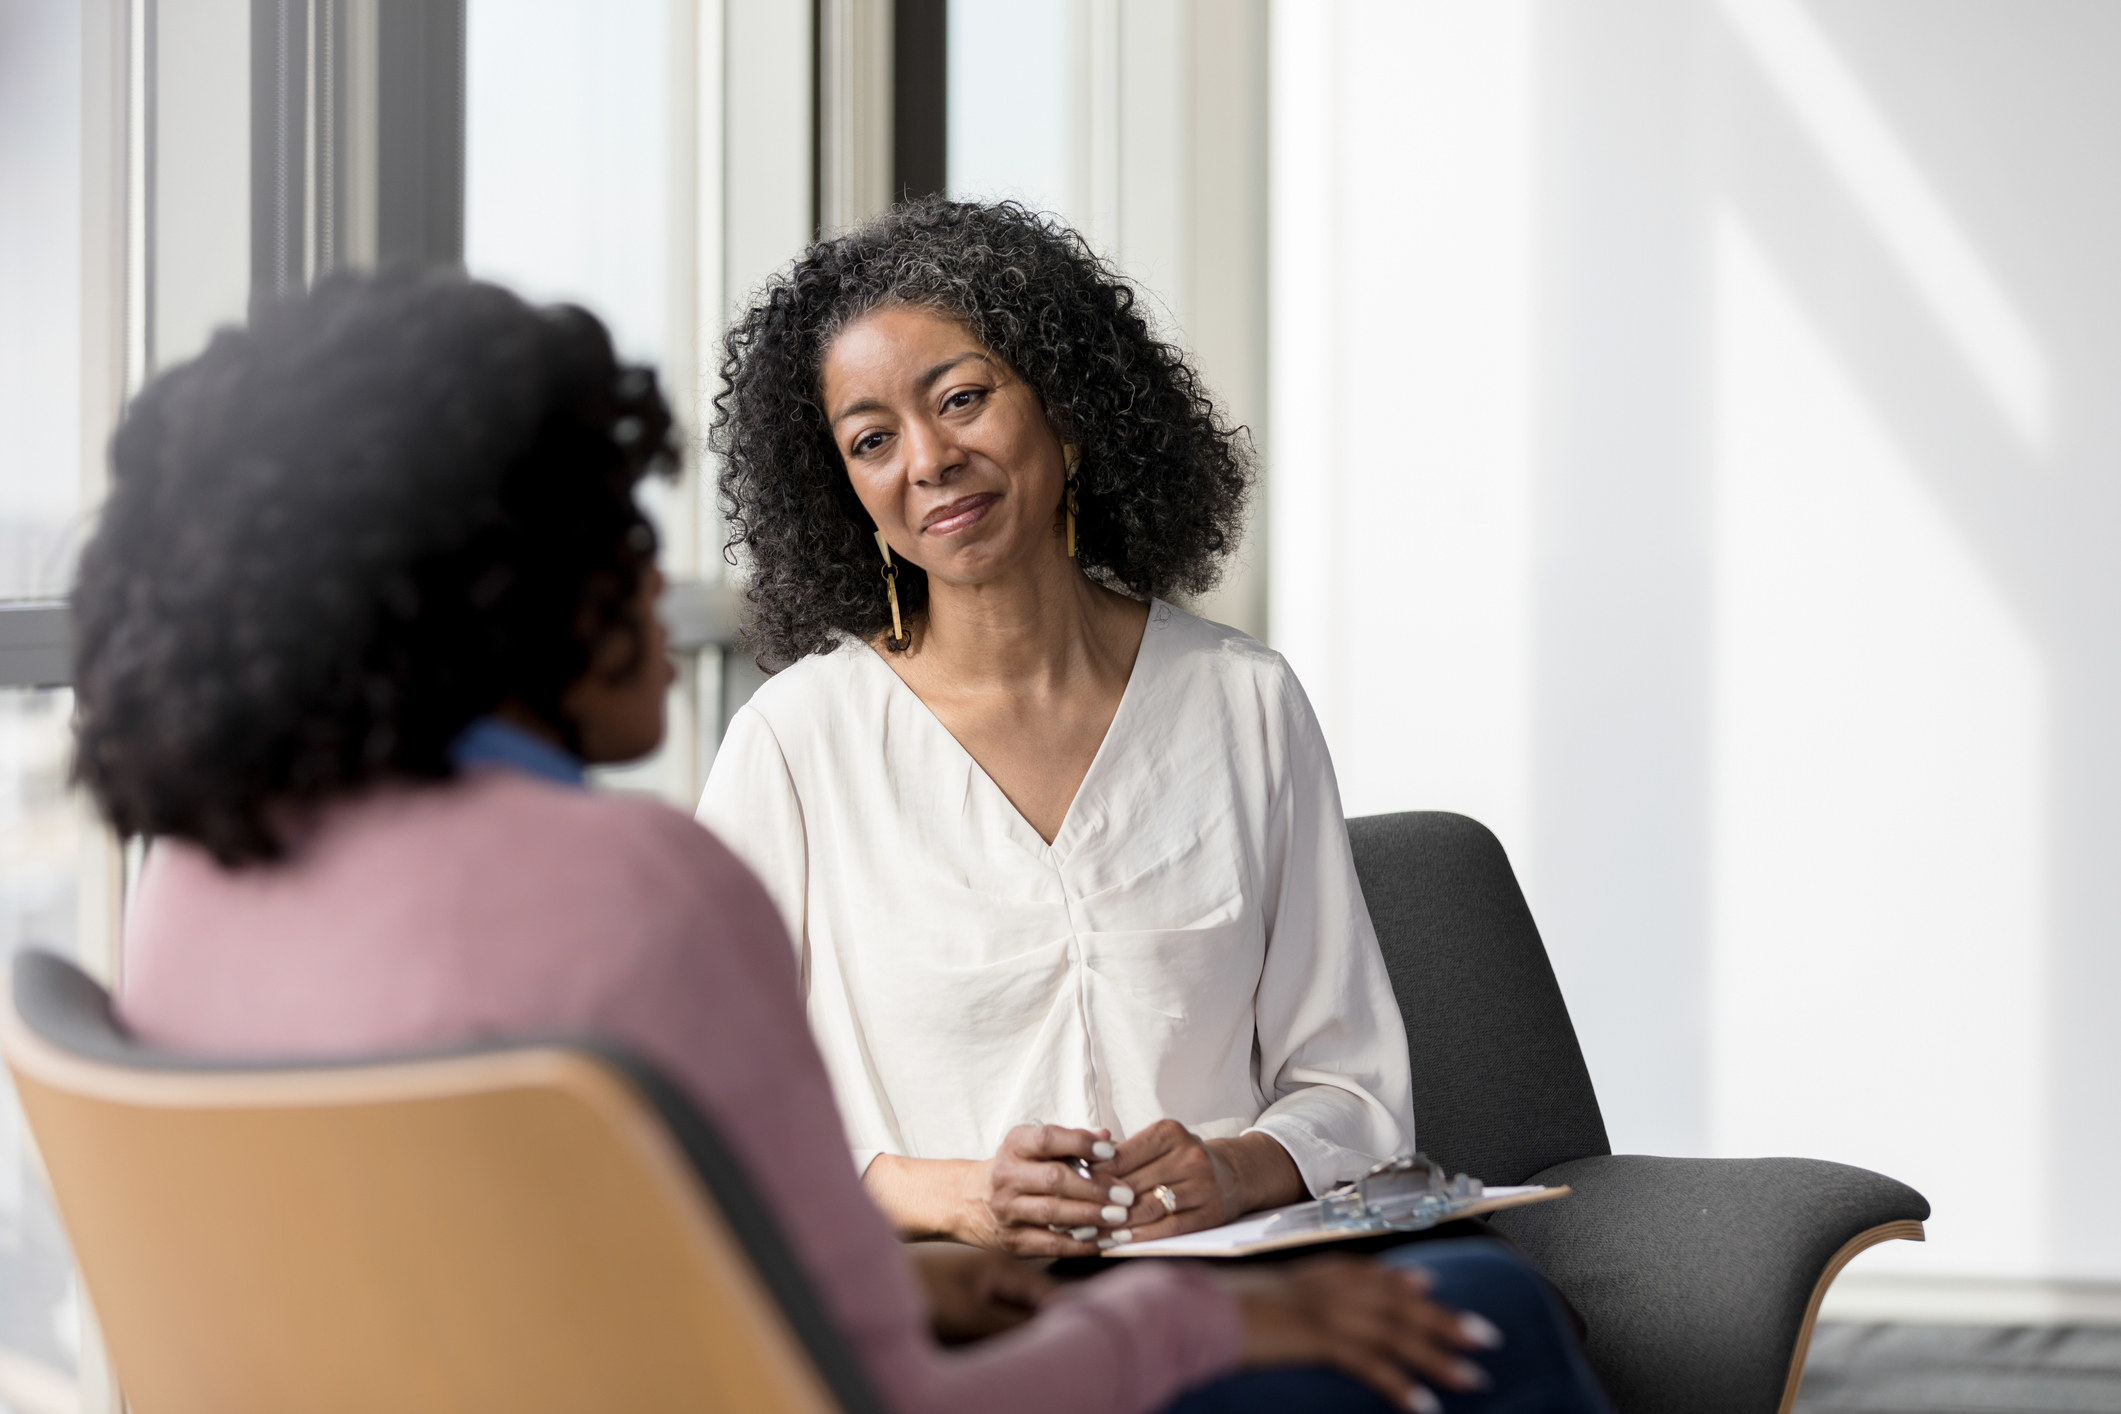 A therapist listens compassionately to a client while she shares her problems.